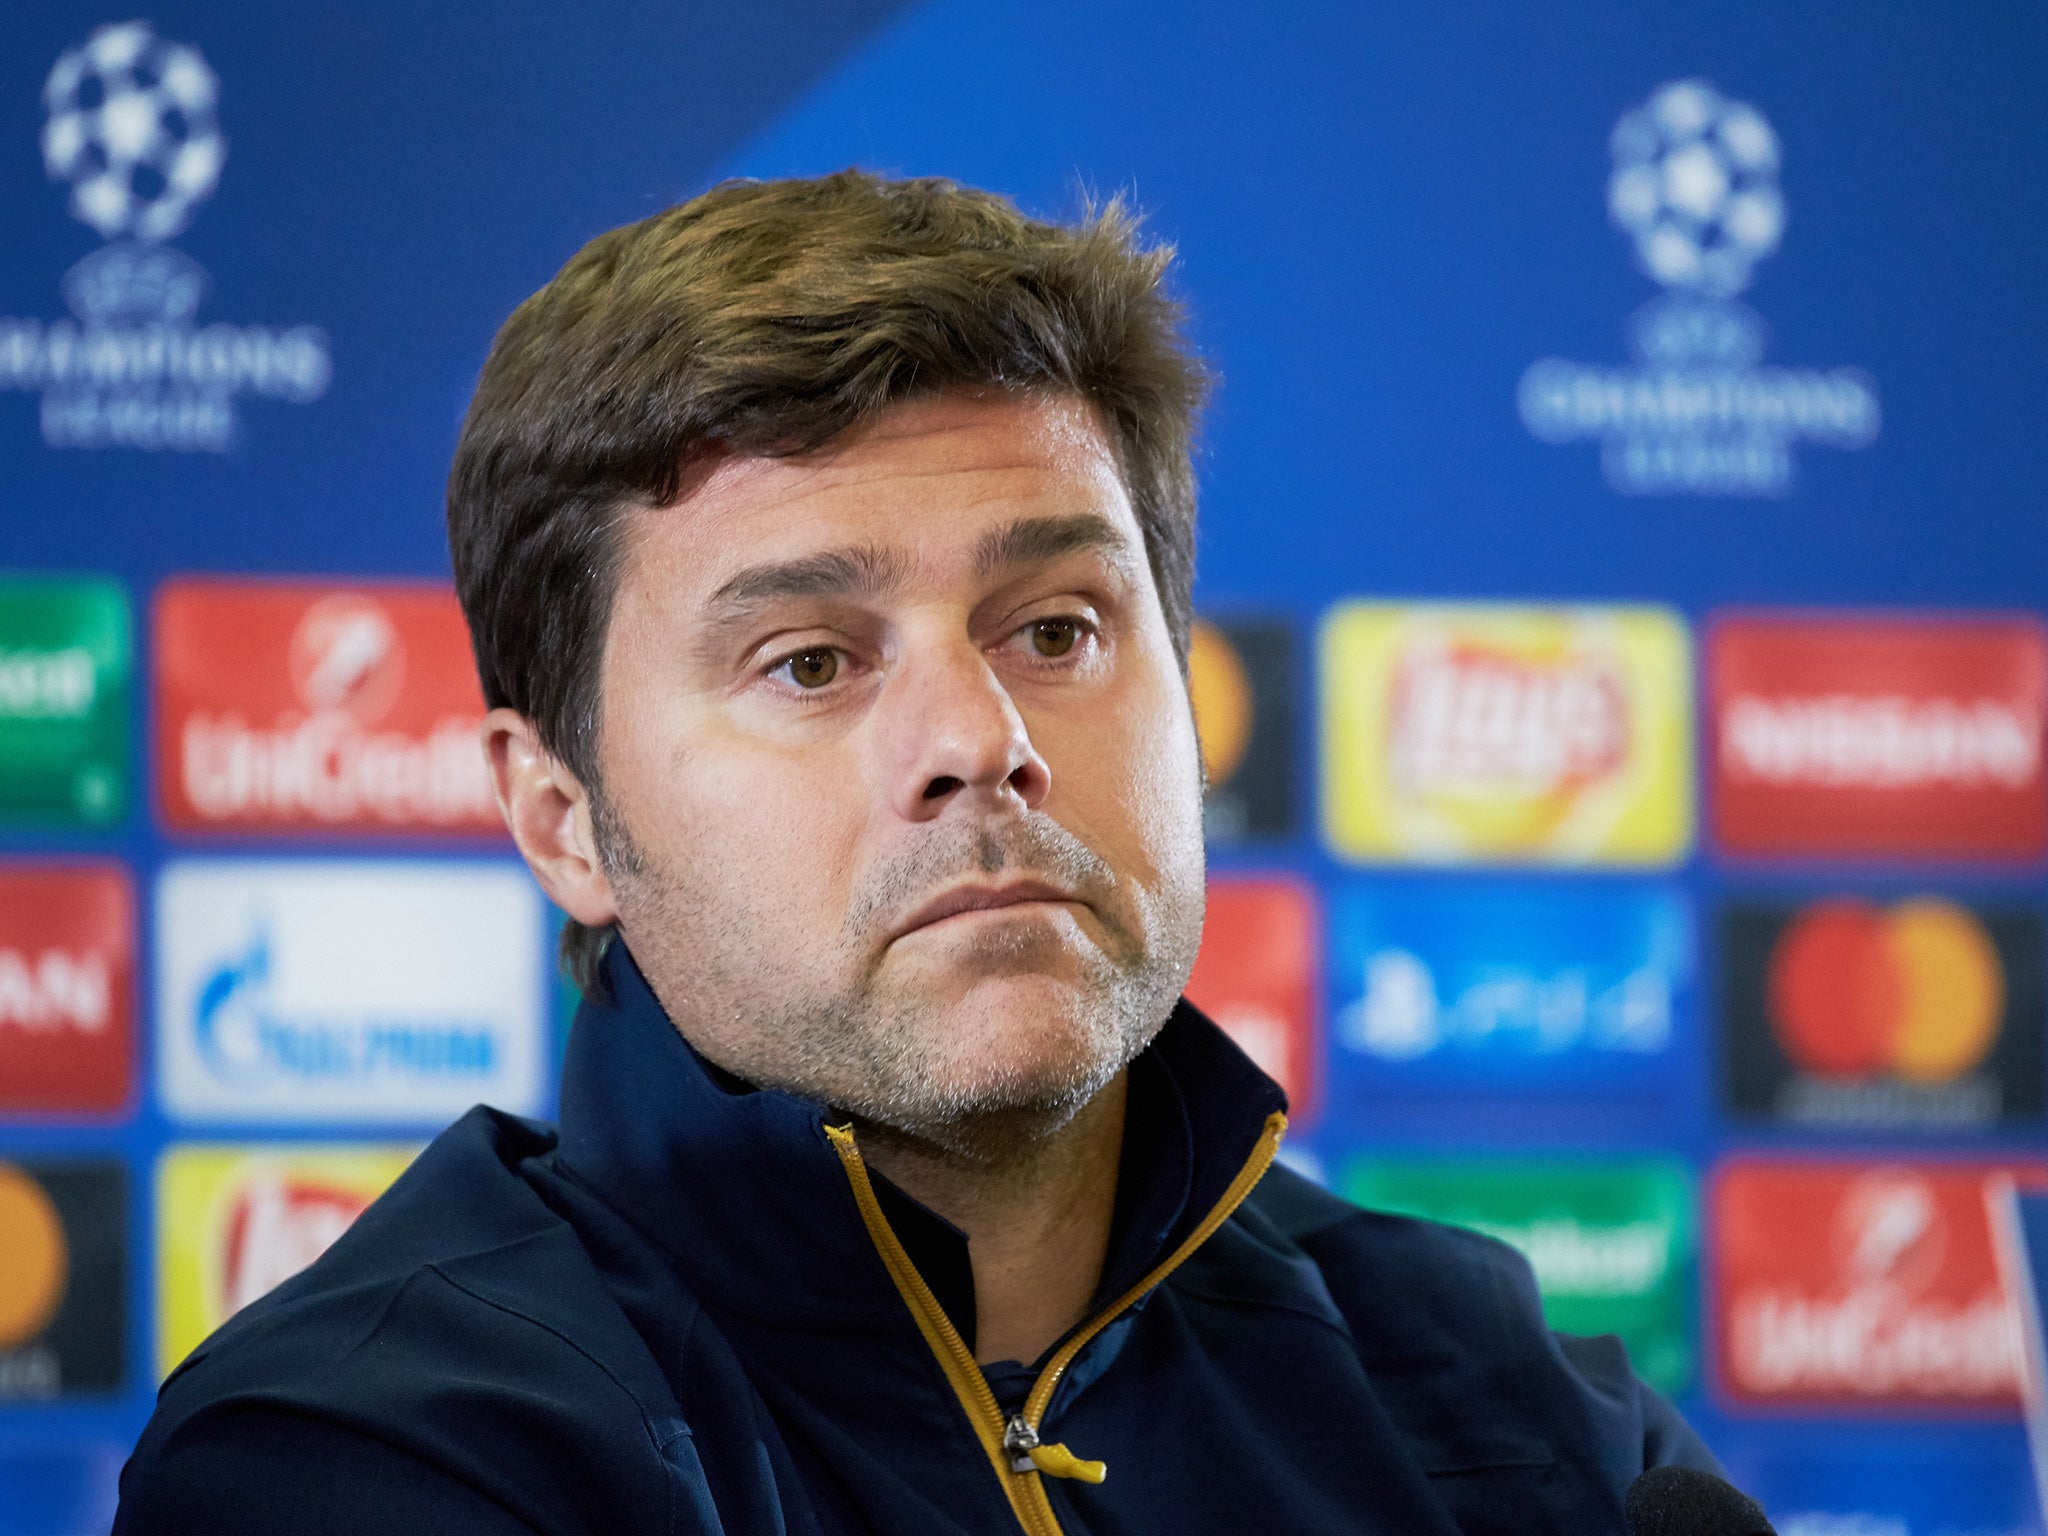 Pochettino will hope to get his side's Champions League campaign back on track in Russia